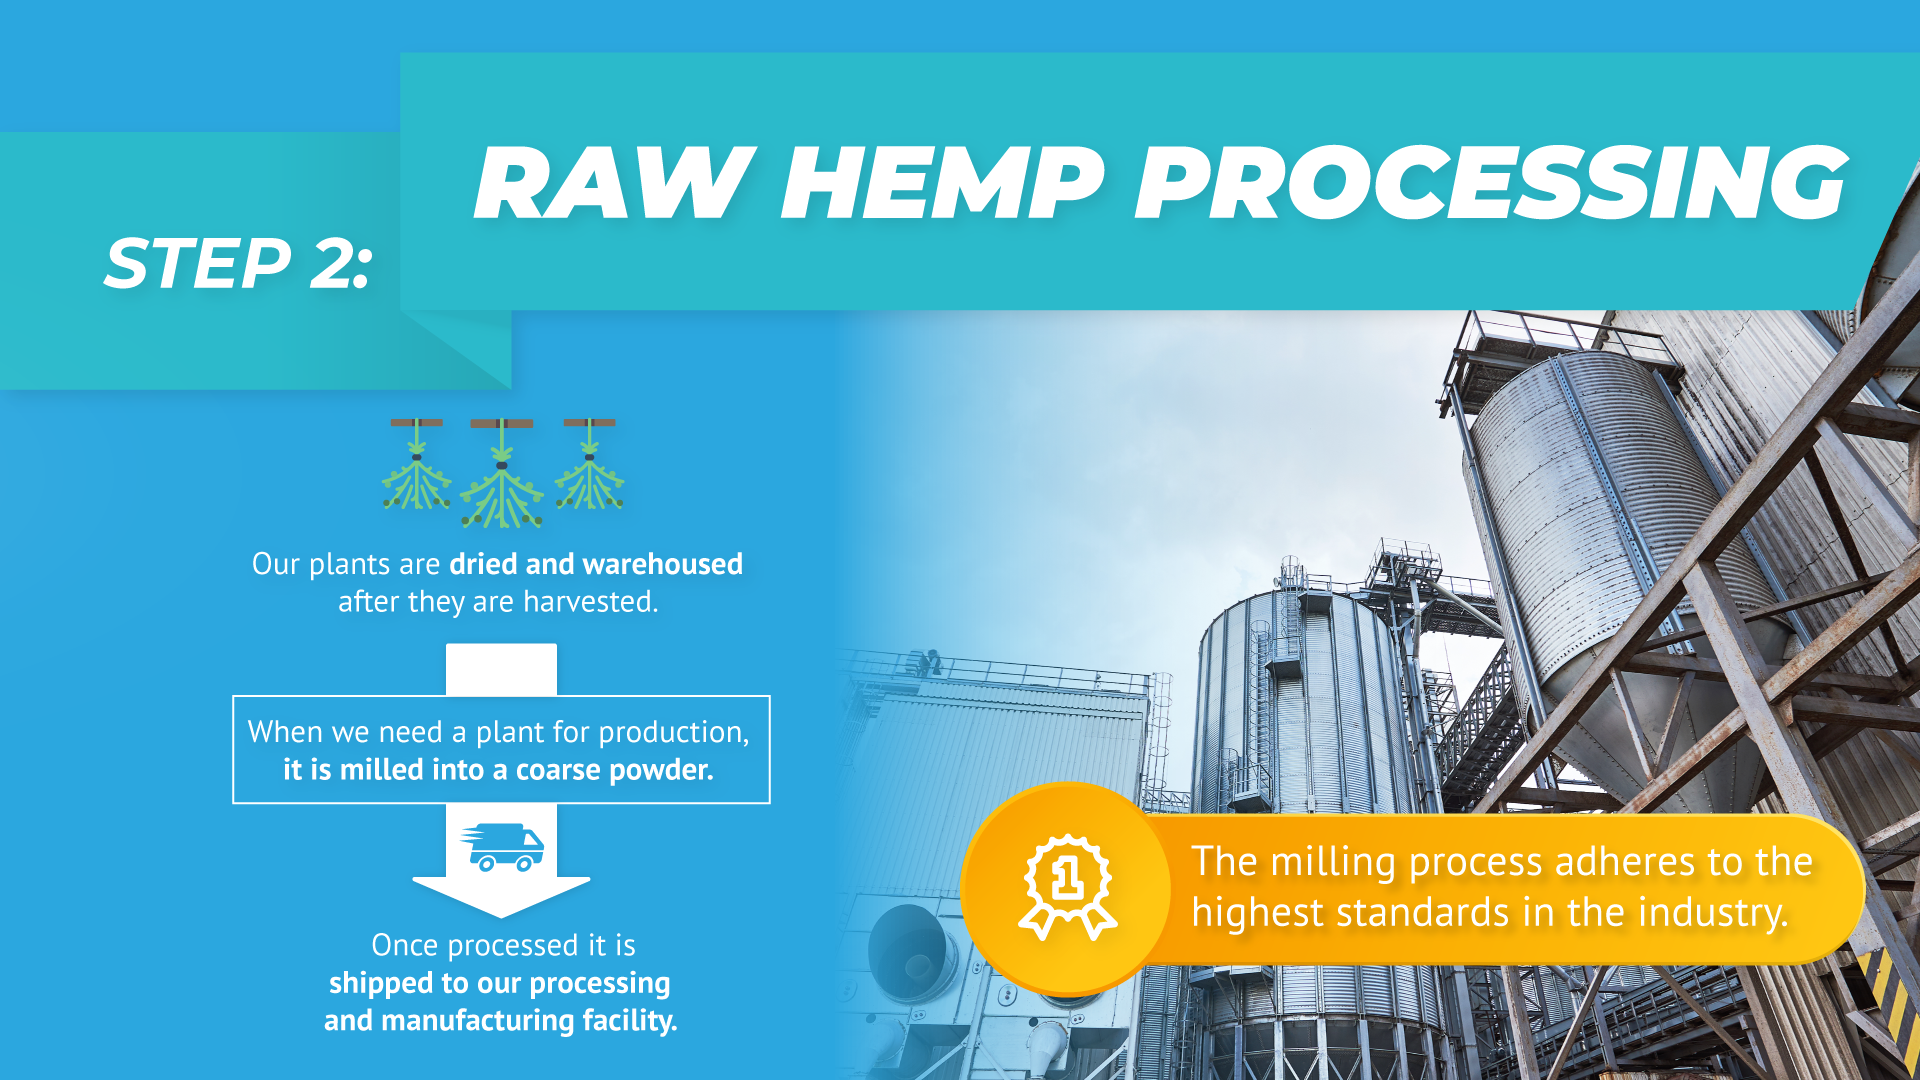 RAW HEMP PROCESSING Our plants are dried and warehoused after they are harvested. When we need a plant for production, it is milled into a coarse powder. The milling process adheres to the highest standards in the industry. Once processed, it is shipped to our processing and manufacturing facility.